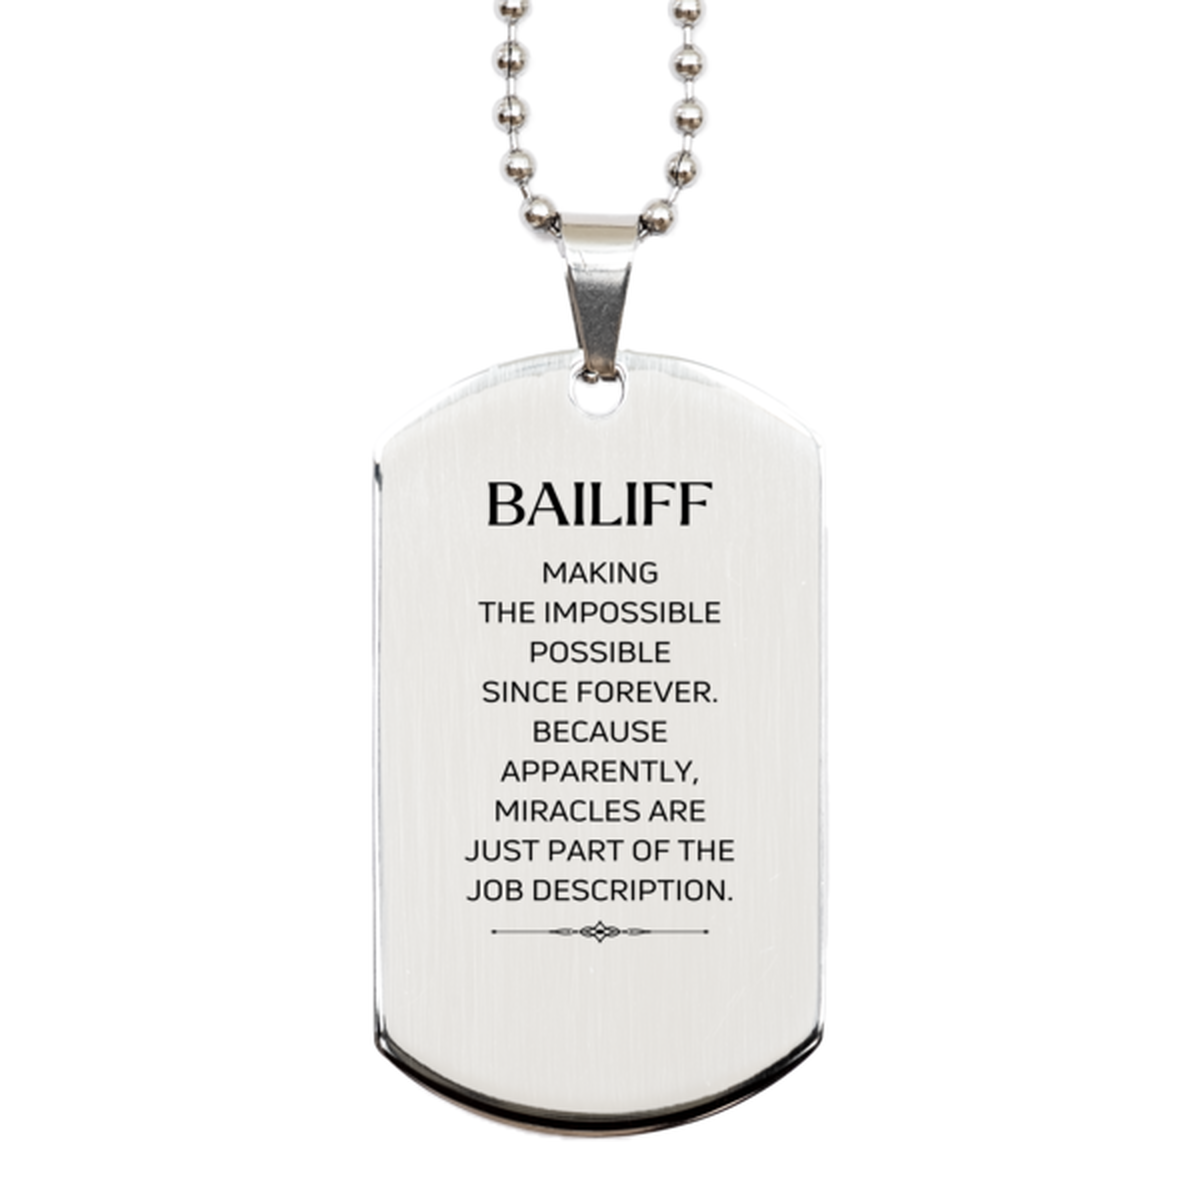 Funny Bailiff Gifts, Miracles are just part of the job description, Inspirational Birthday Silver Dog Tag For Bailiff, Men, Women, Coworkers, Friends, Boss